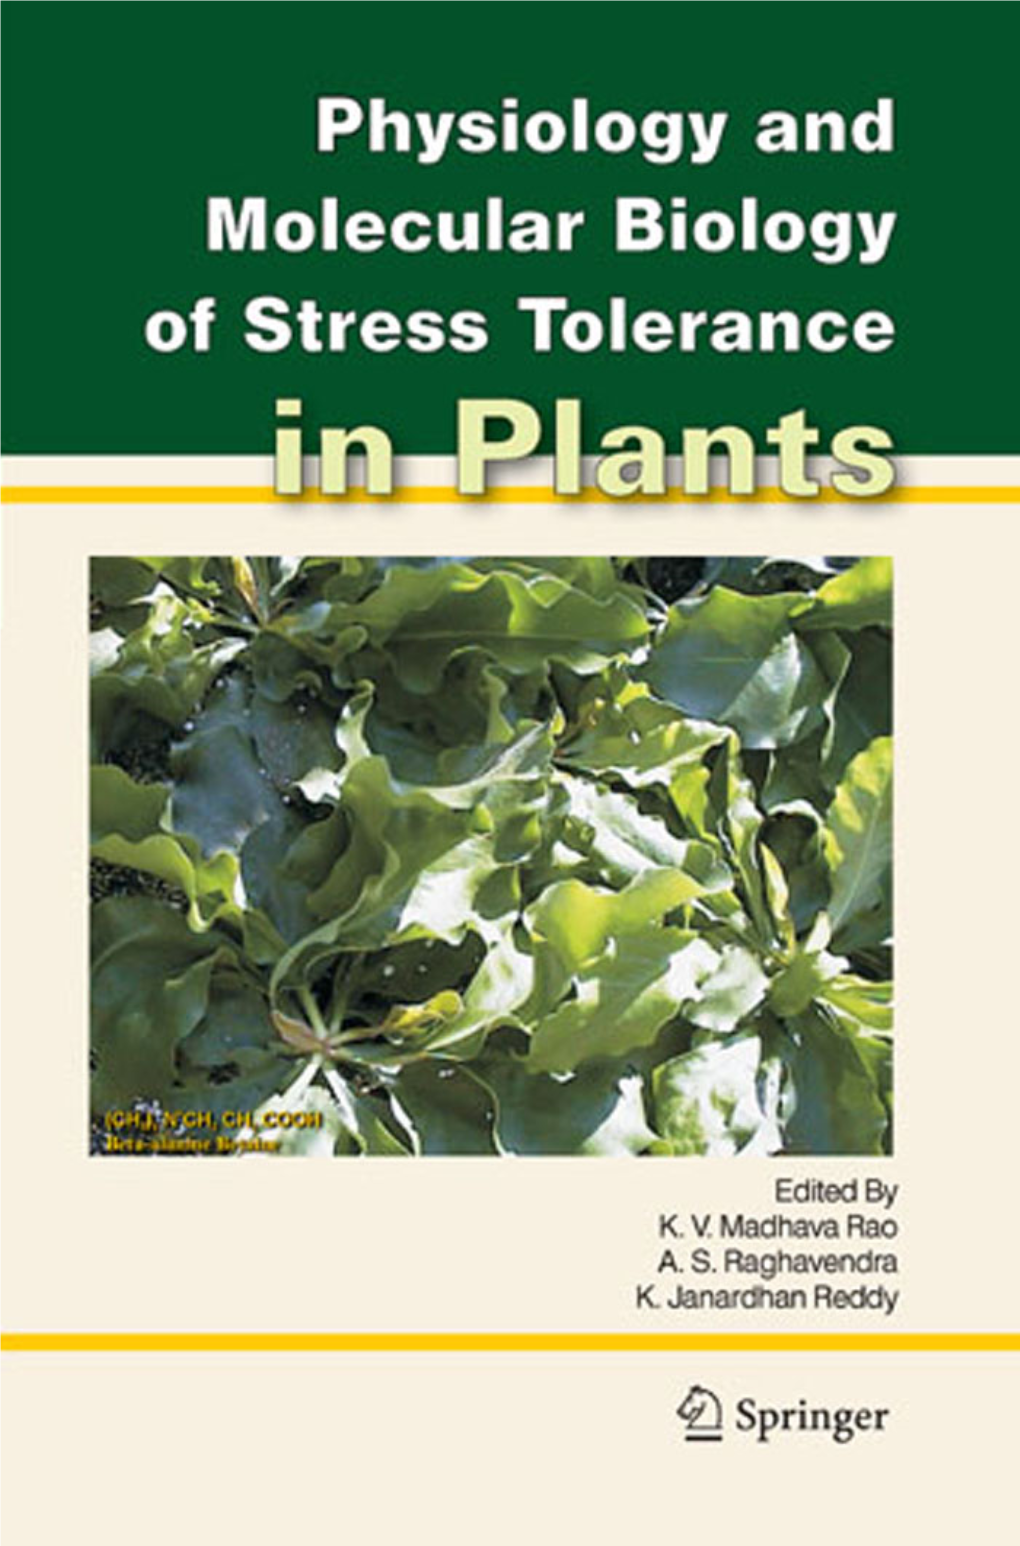 PHYSIOLOGY and MOLECULAR BIOLOGY of STRESS TOLERANCE in PLANTS Physiology and Molecular Biology of Stress Tolerance in Plants